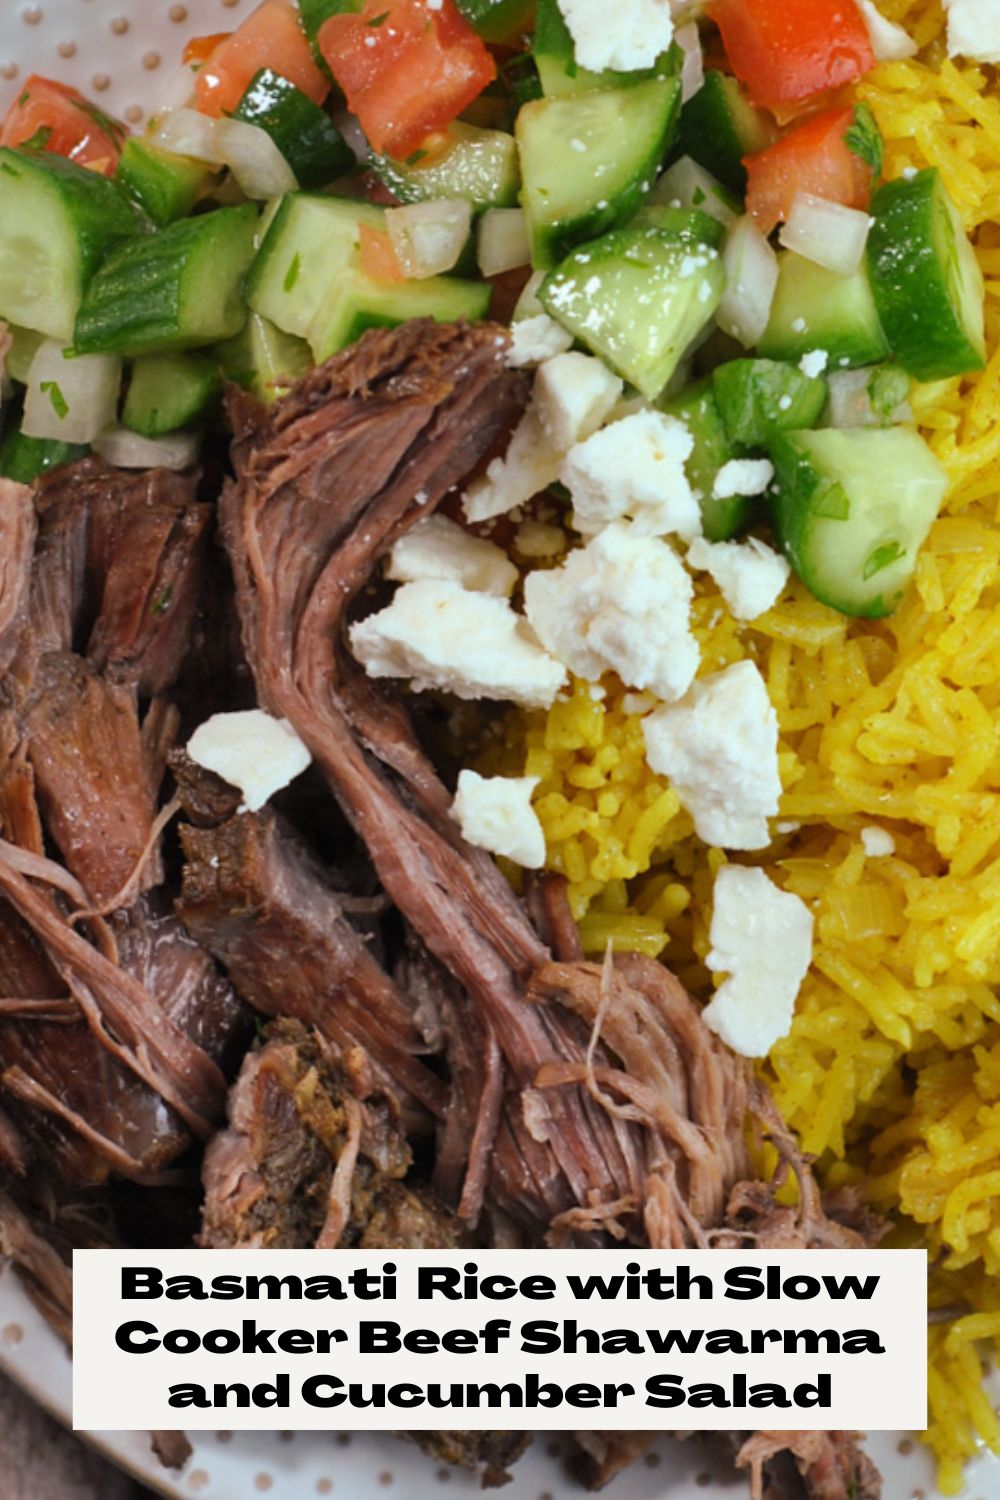 Basmati Rice with Slow Cooker Beef Shawarma and Cucumber Salad via @preventionrd